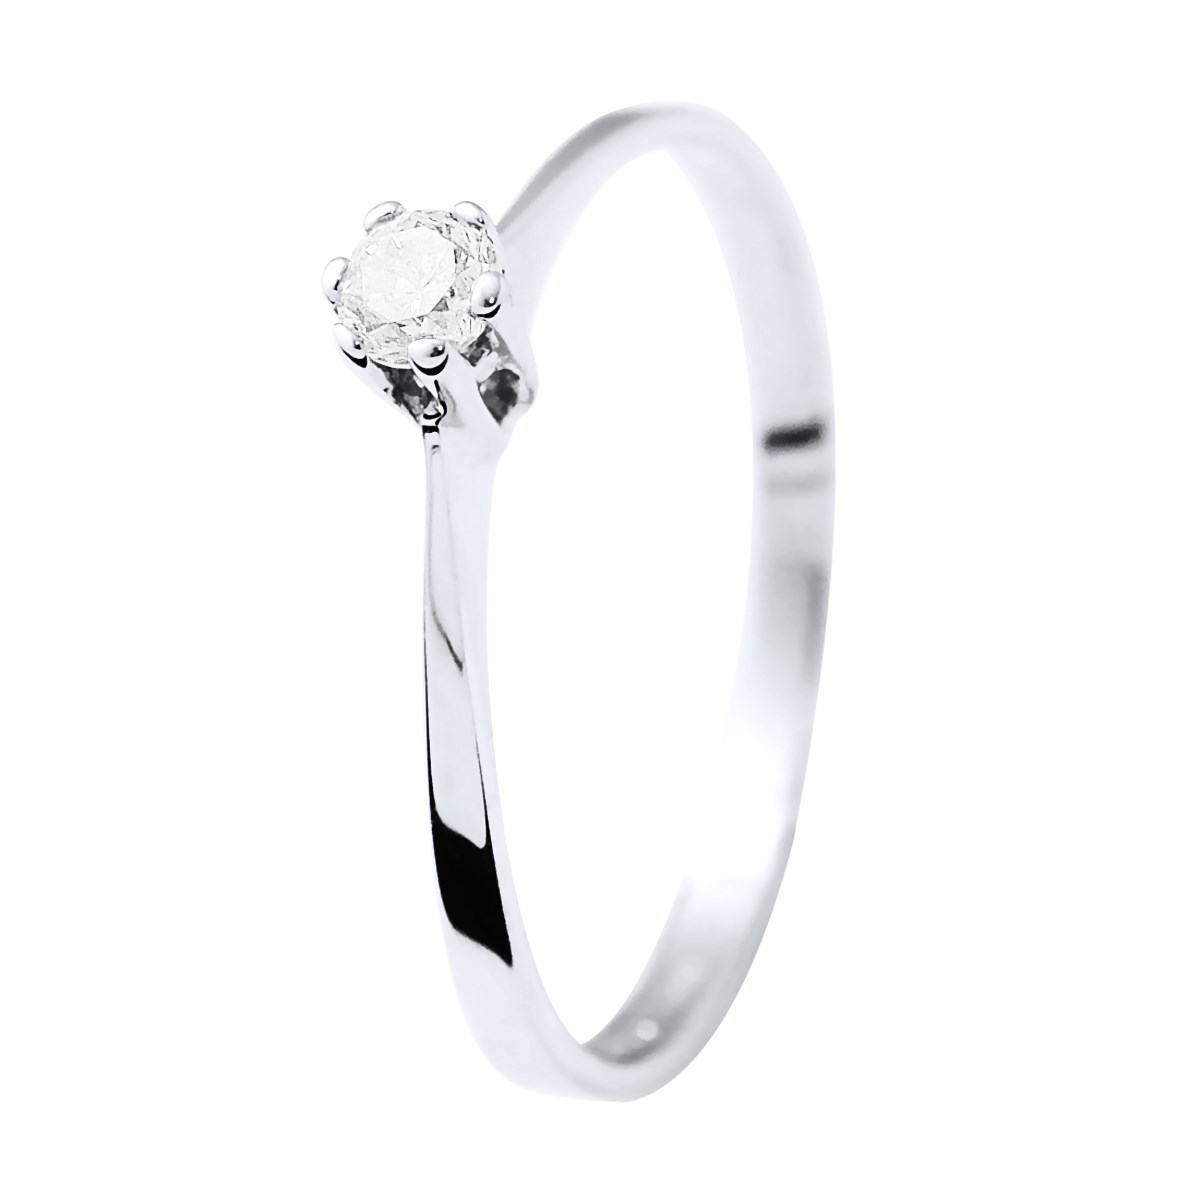 Solitaire Diamant 0,10 Cts Joaillerie Or Blanc